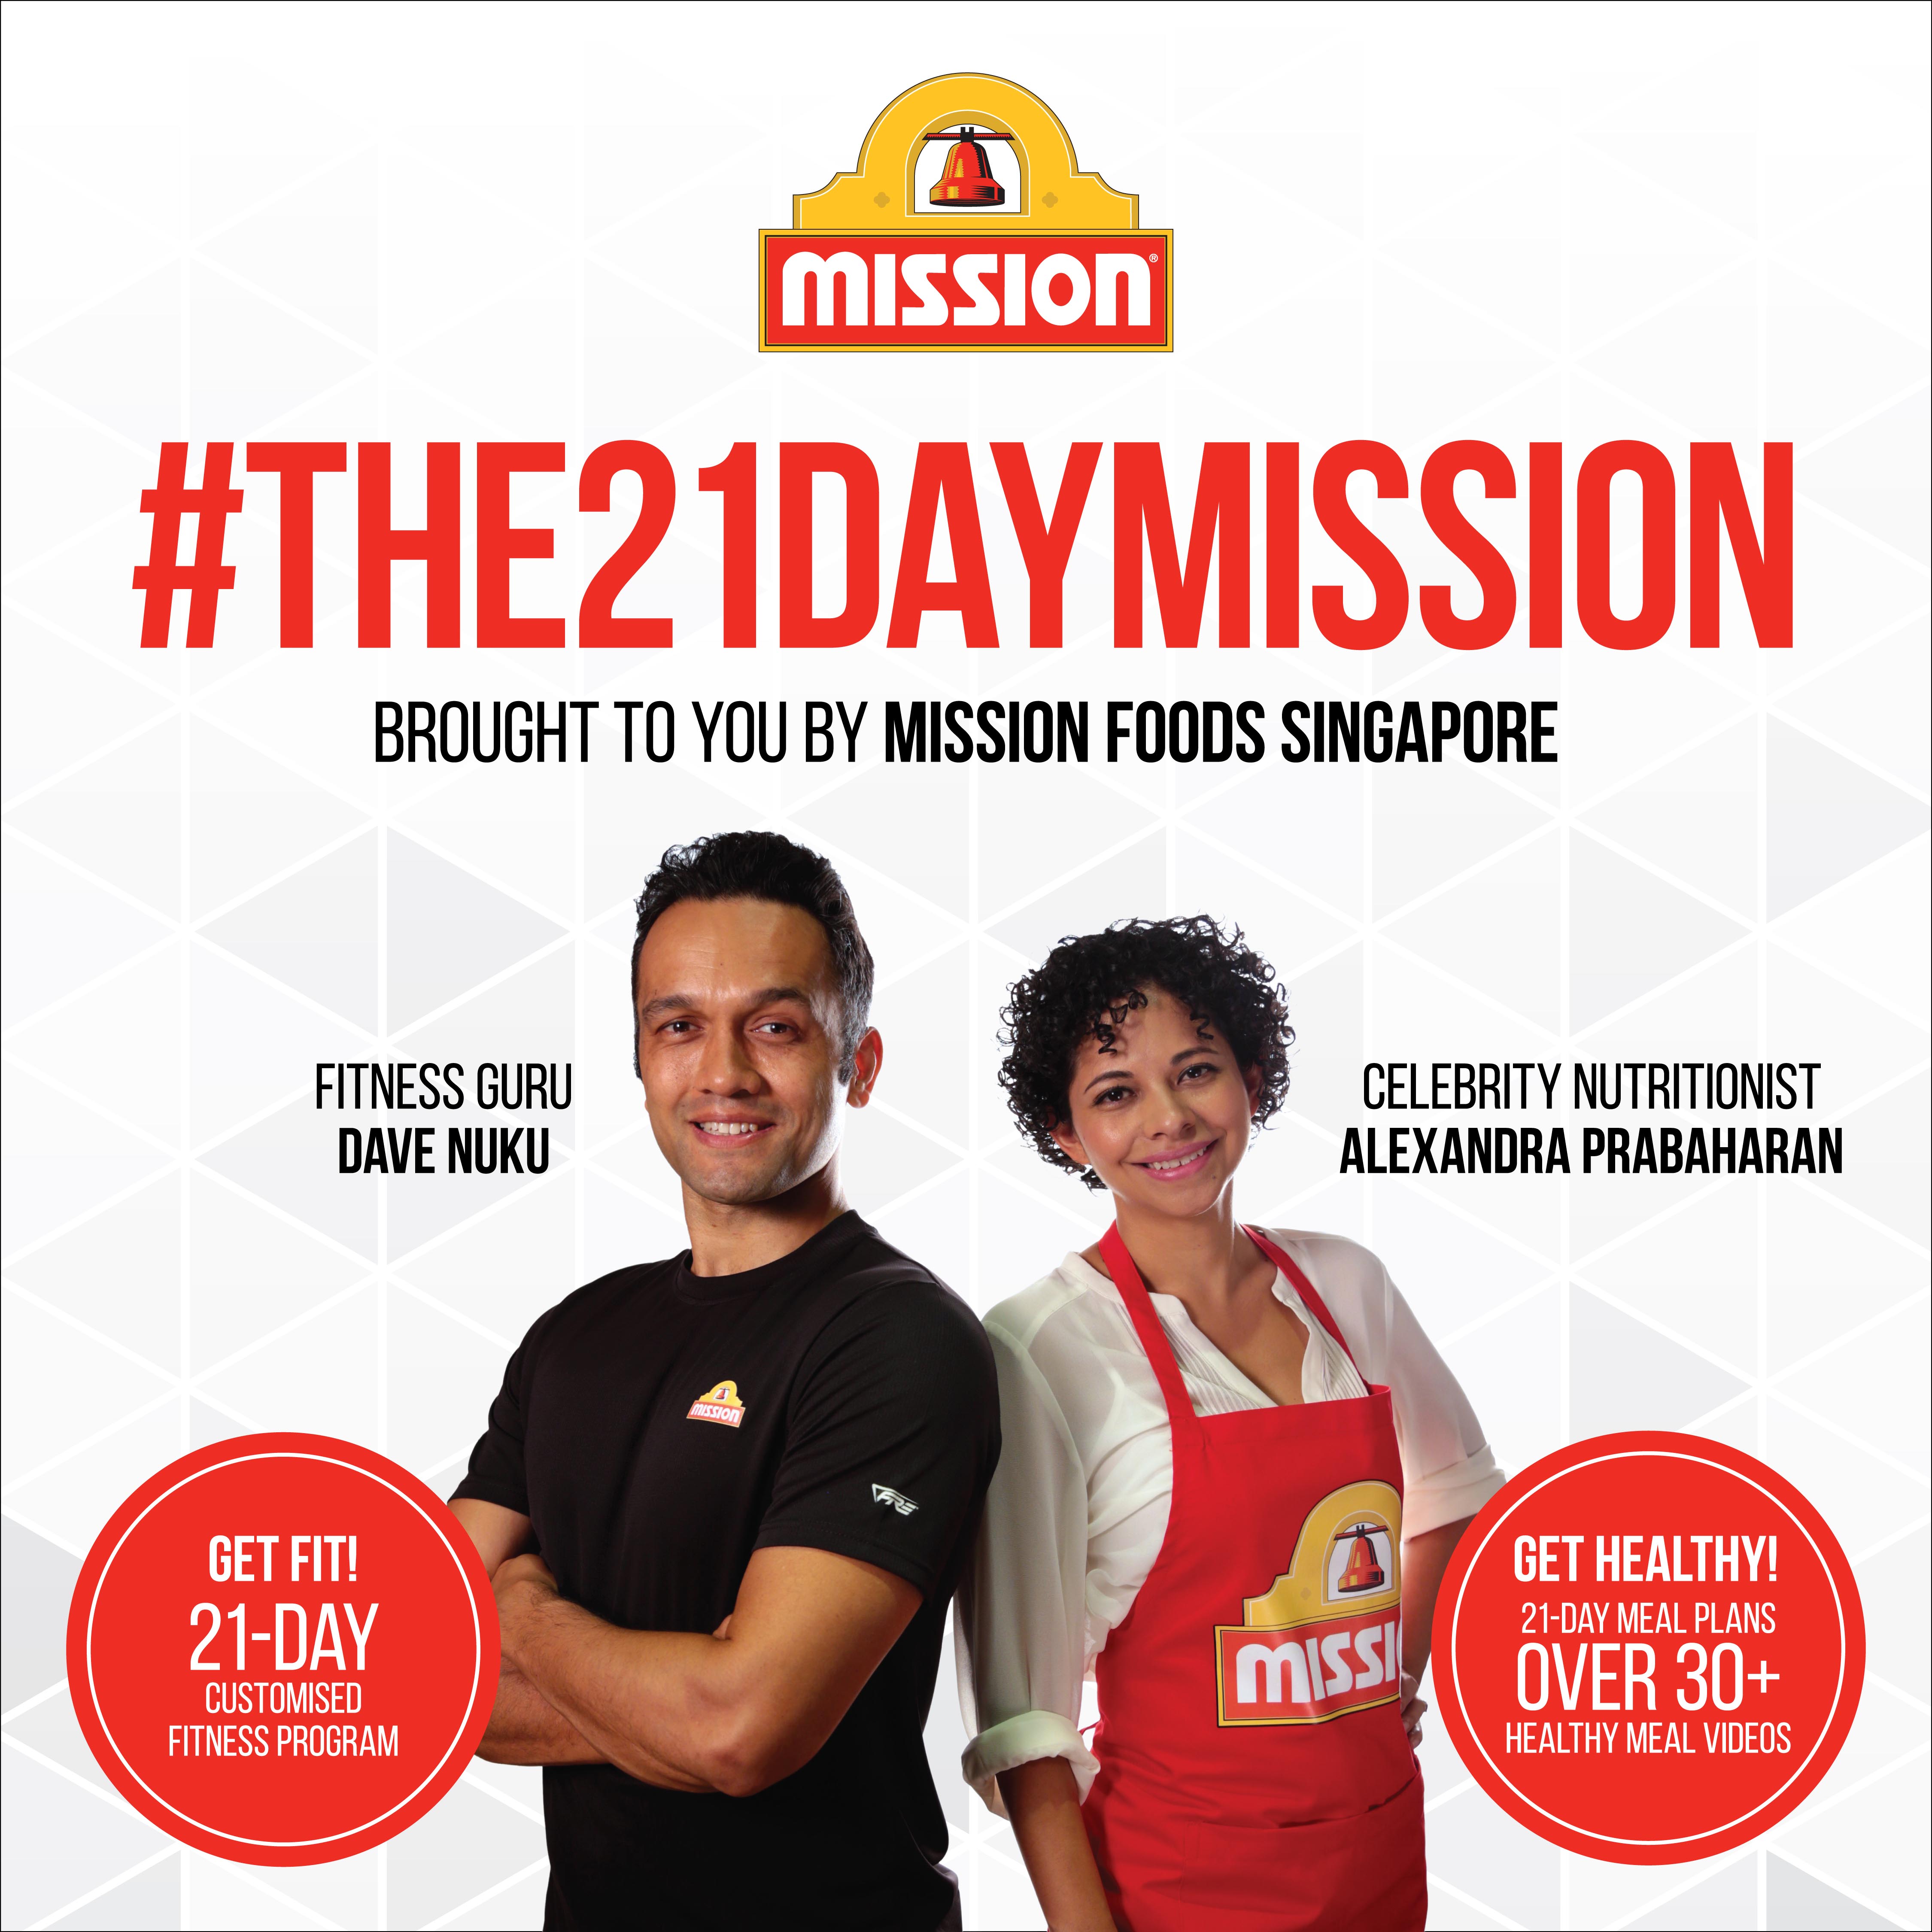 #The21DayMission, a new programme spearheaded by Mission Foods Singapore, which features fitness videos and meal plans for subscribers. 